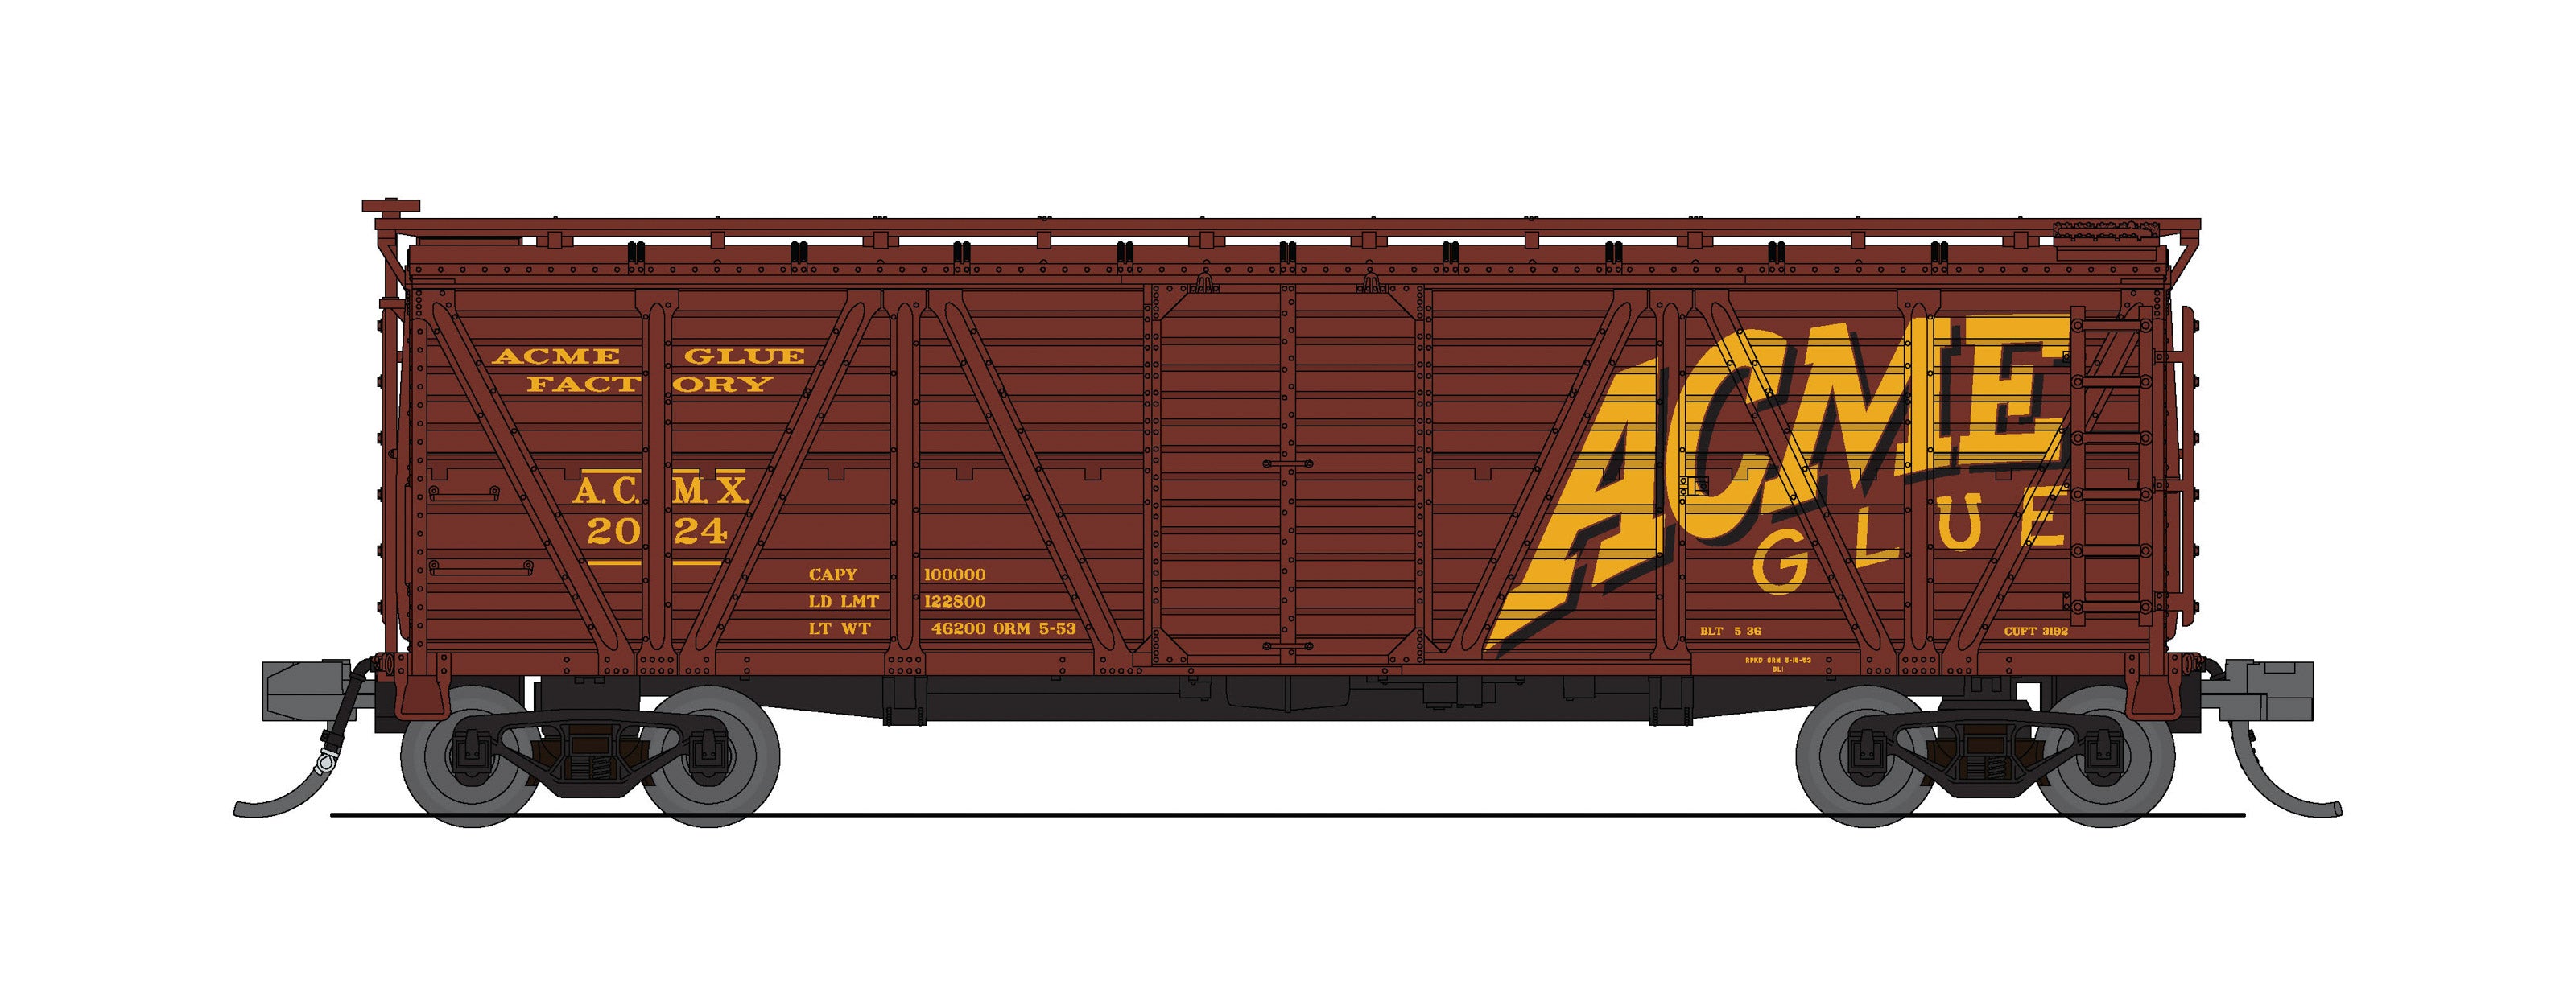 8471 40' Wood Stock Car, Acme Glue Factory, Horse Sounds, N Scale